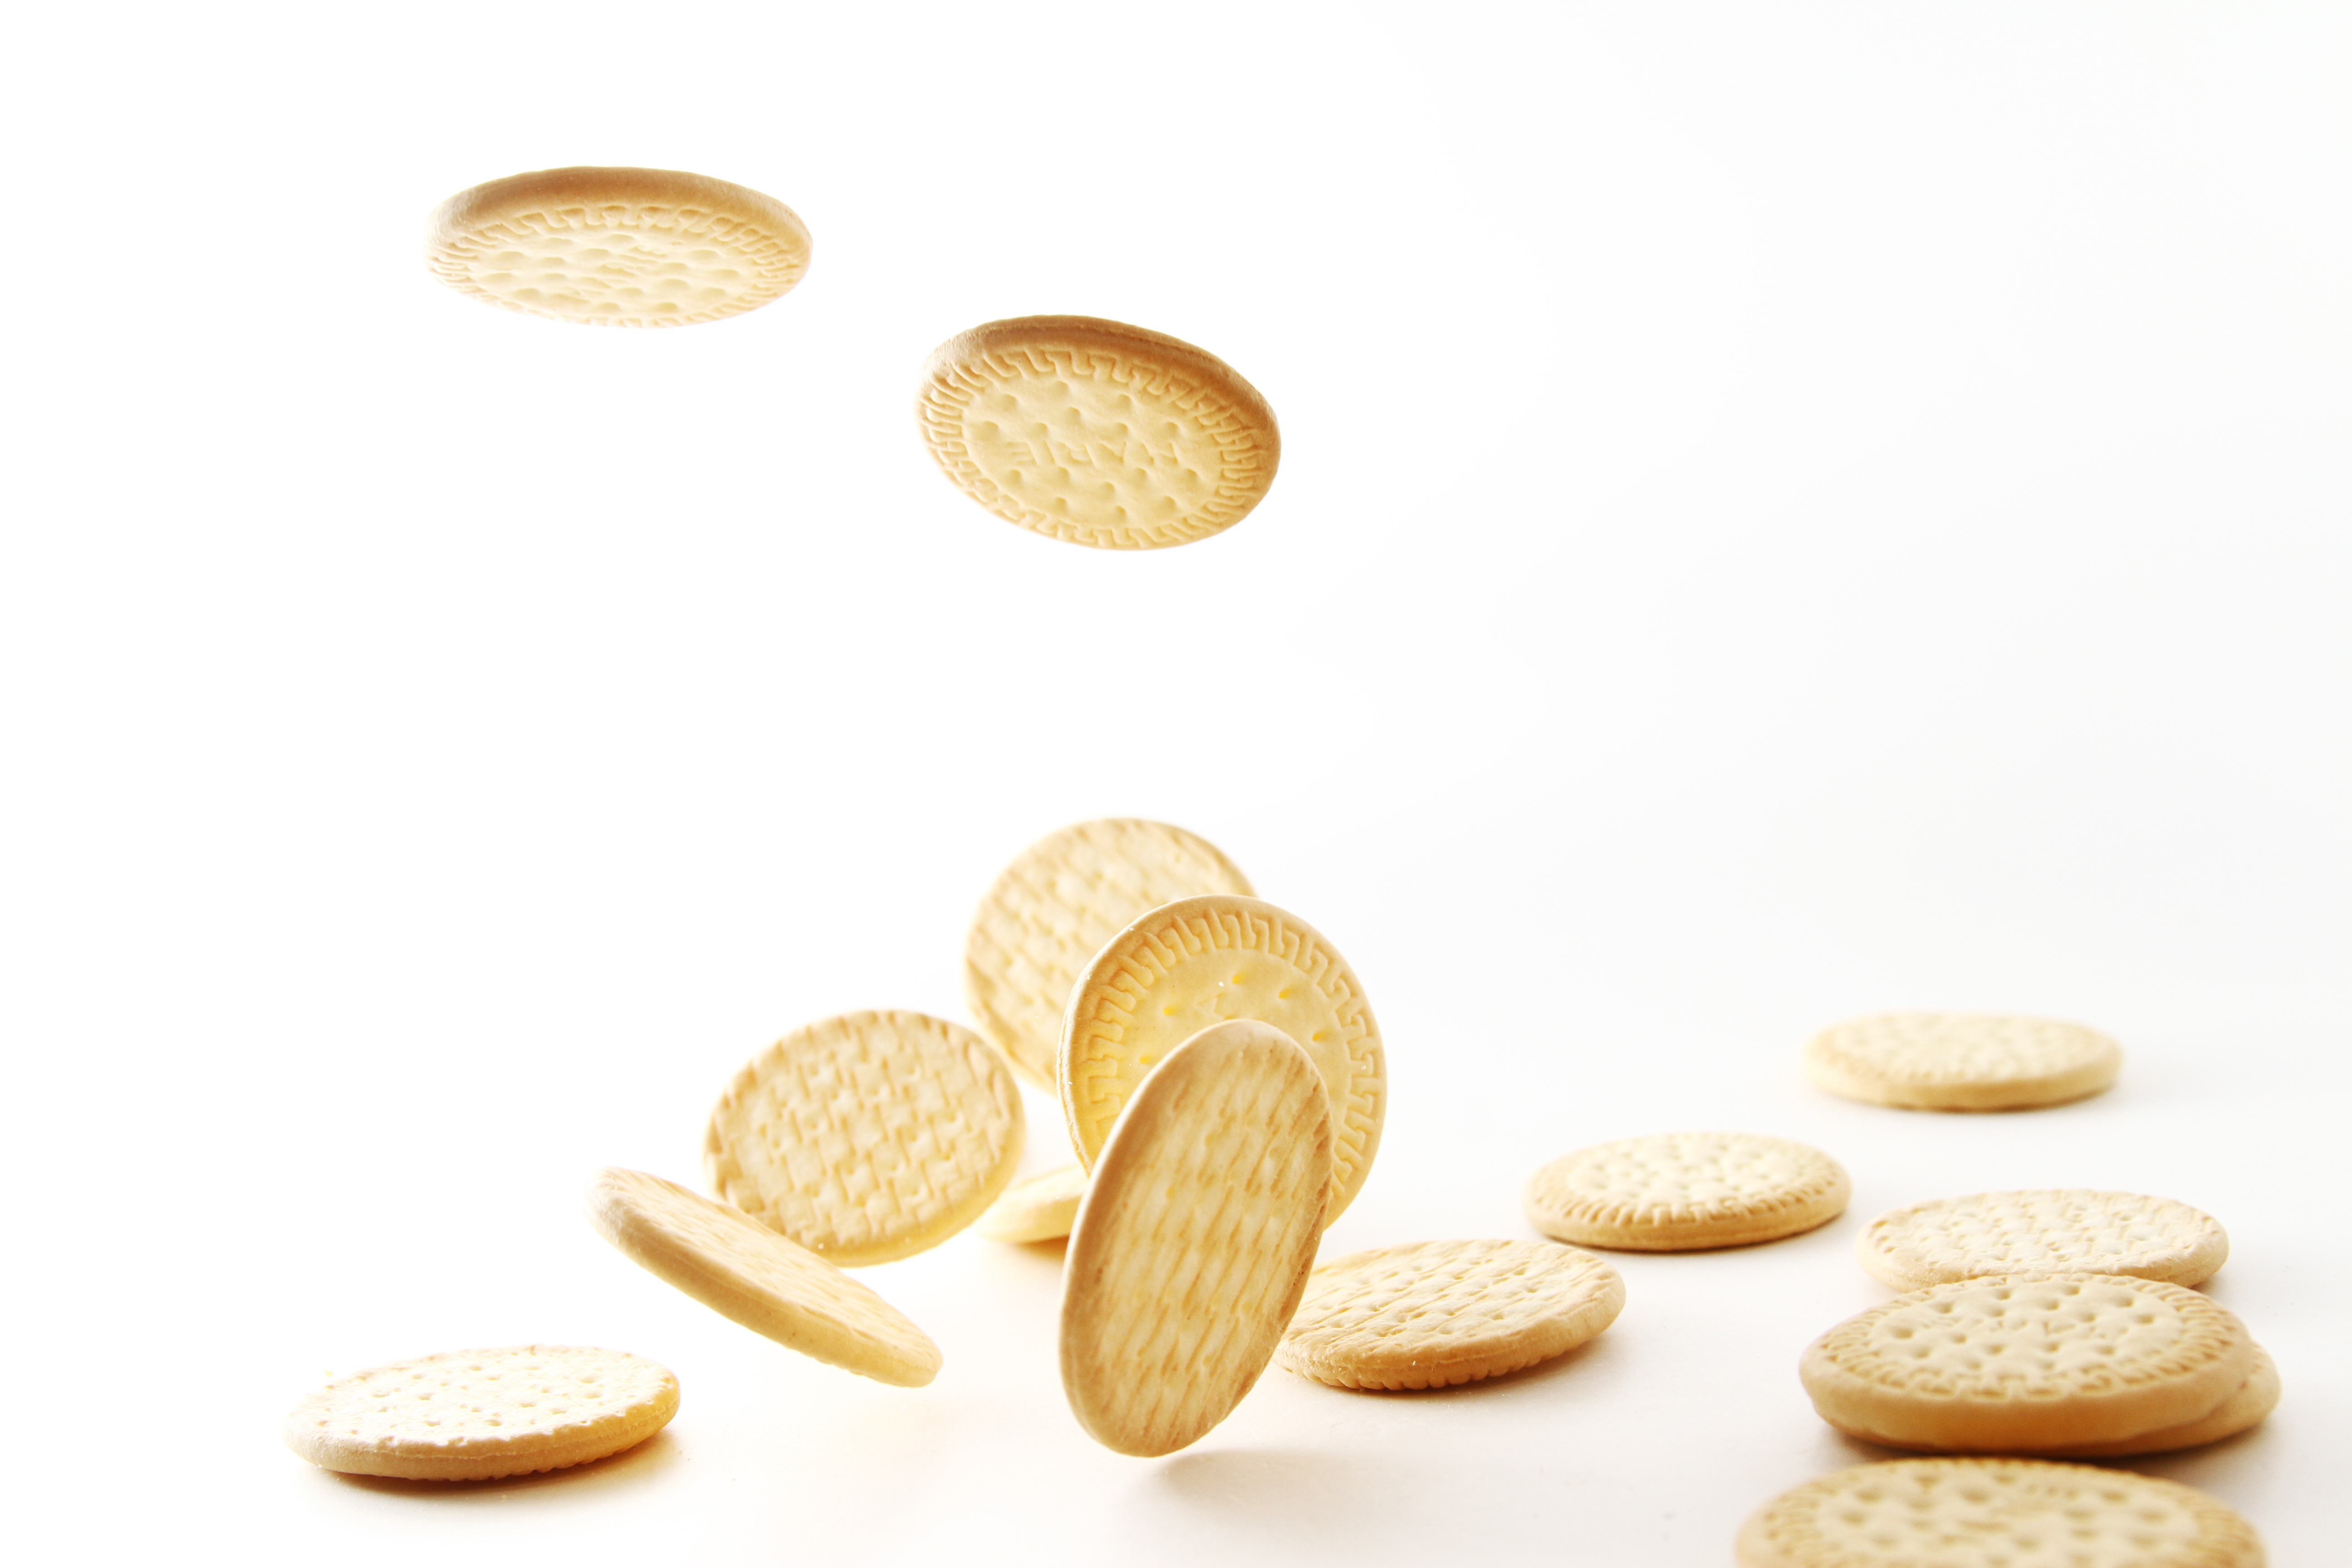 Marie biscuit in white background / A Marie biscuit is a type of biscuit similar to a rich tea biscuit.